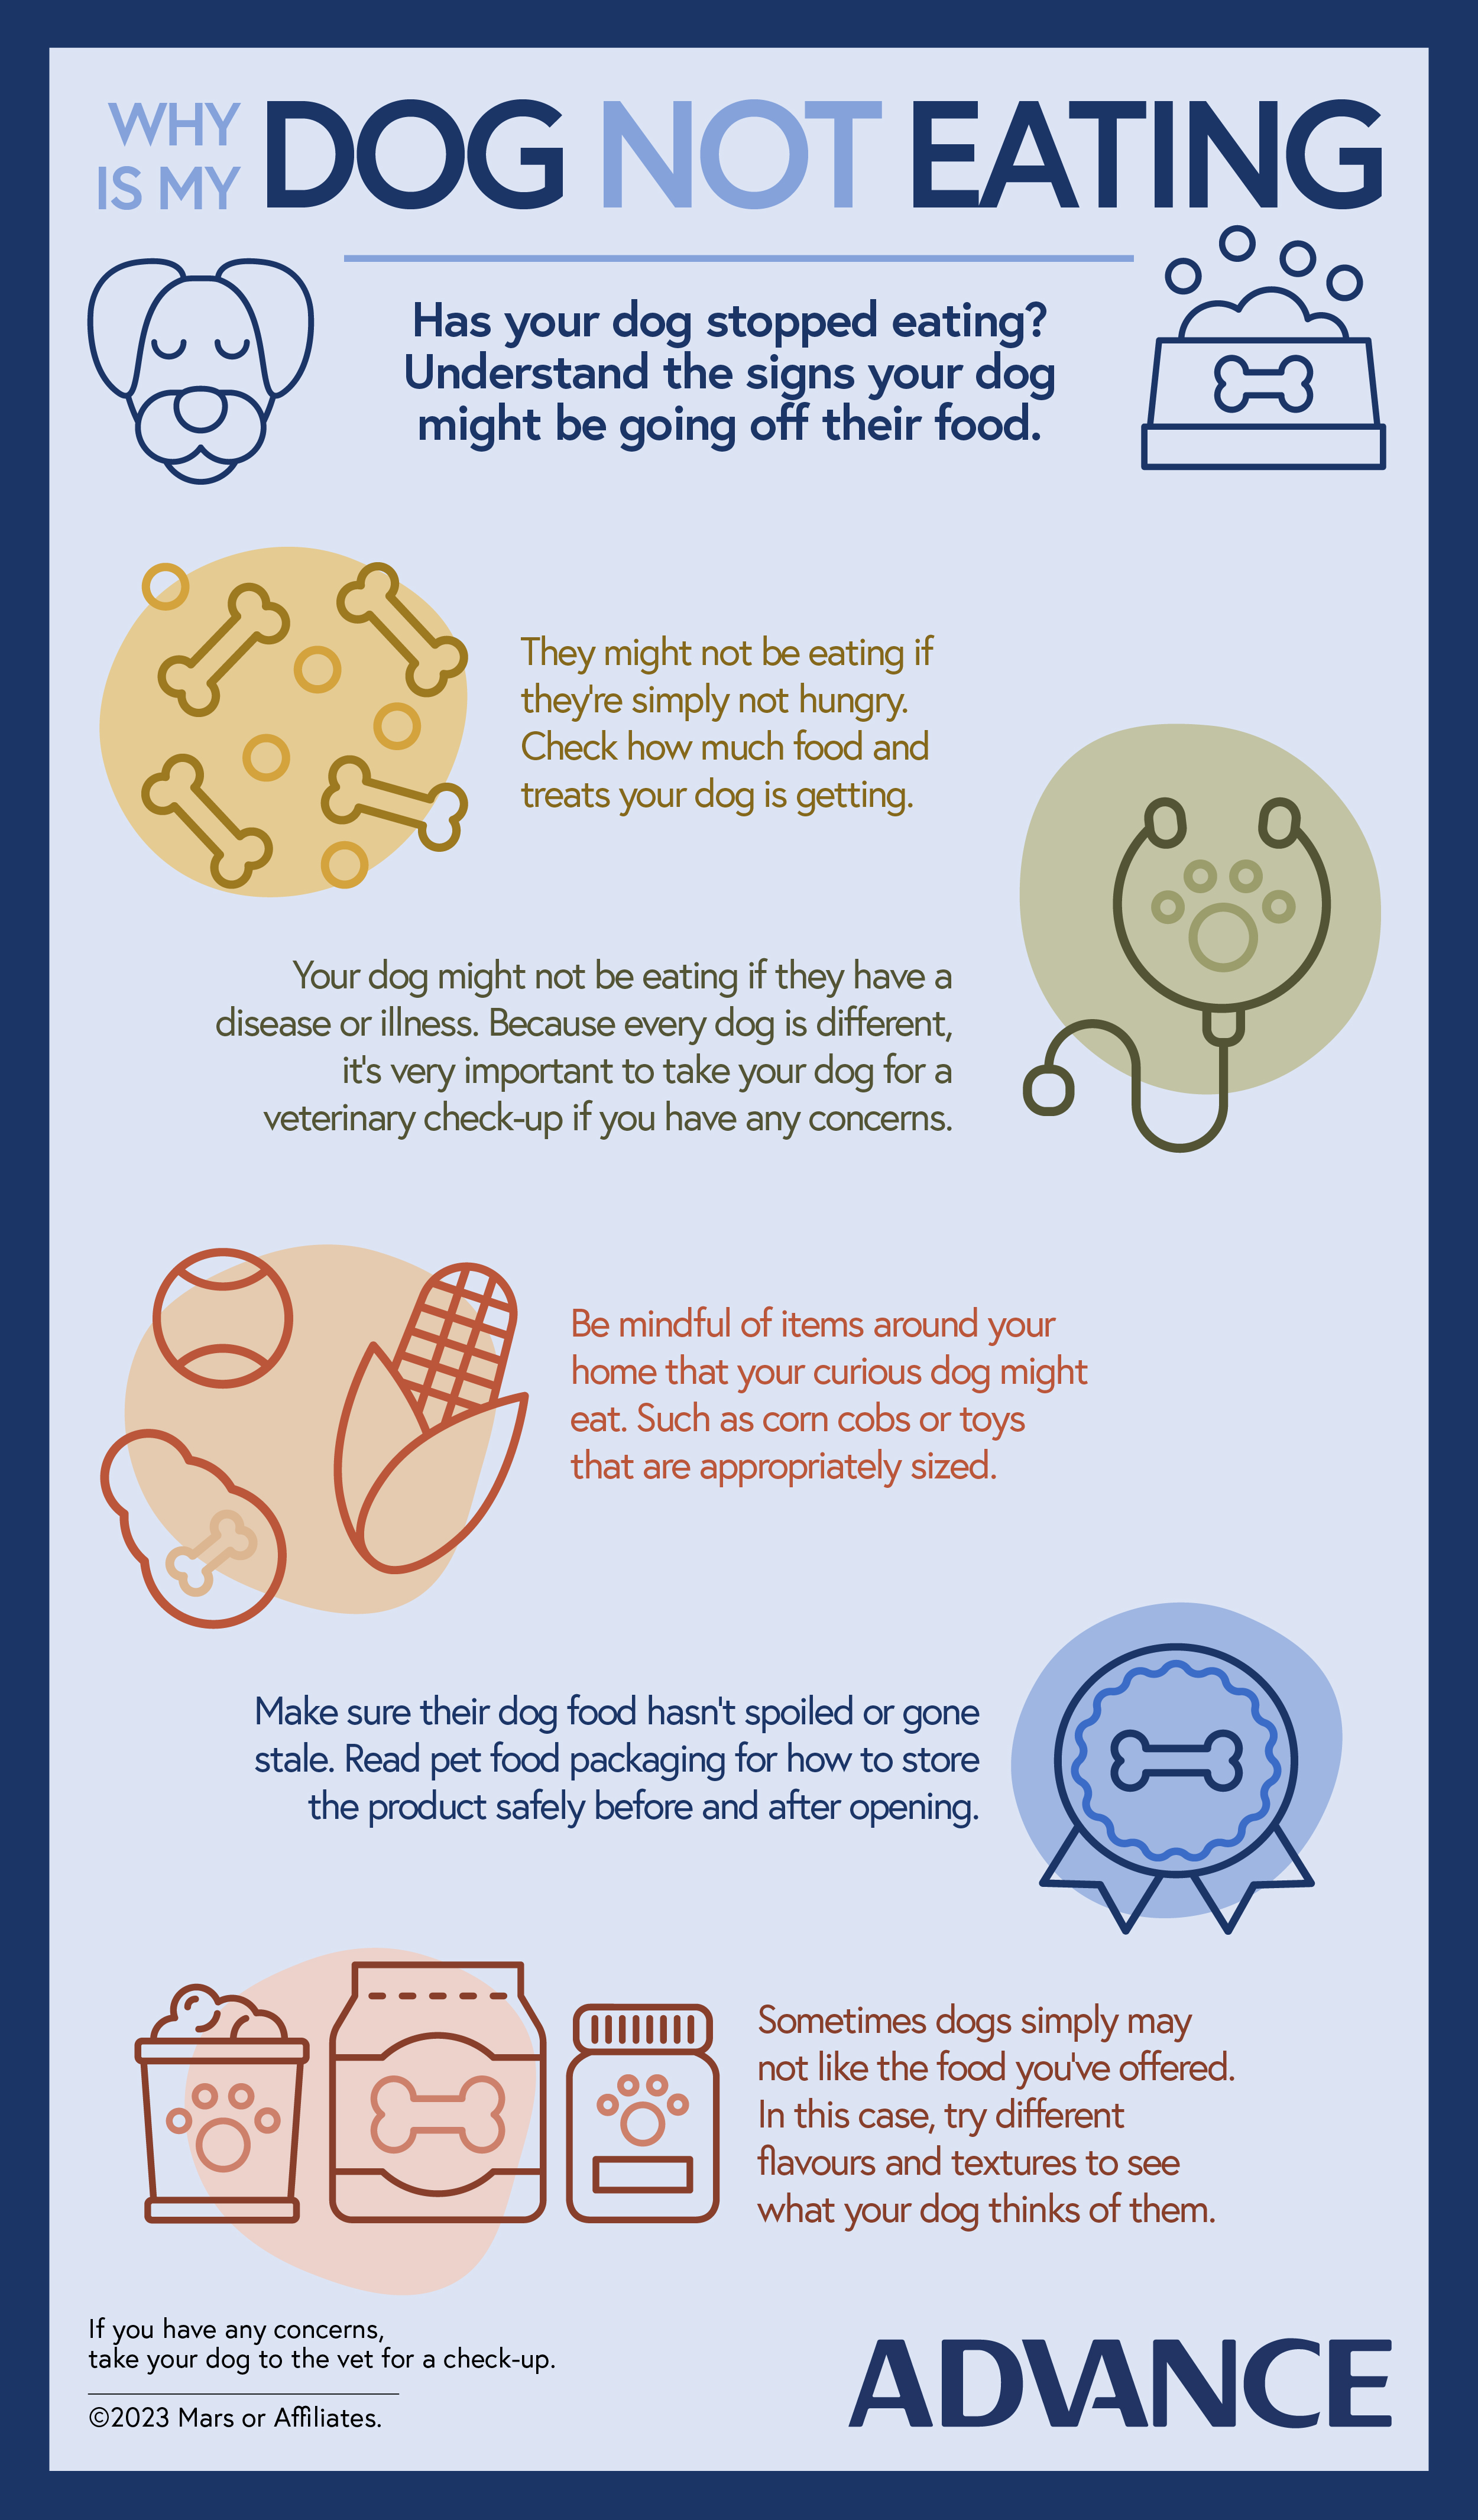 Month2 - Dog not Eating Infographic